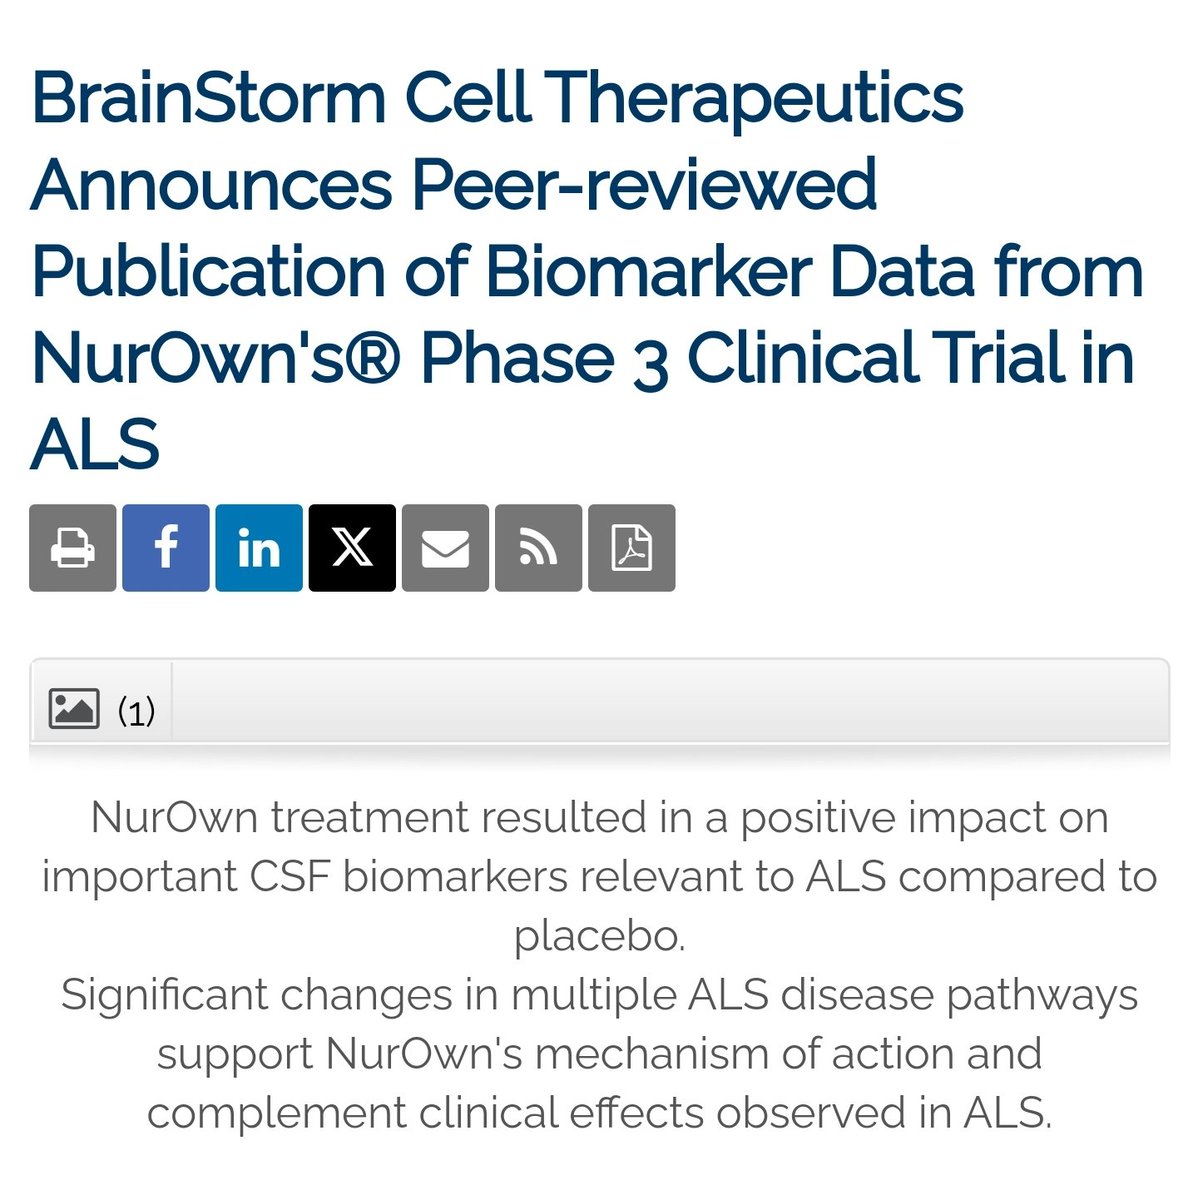 Just so we're clear: Let's say, lower NfL is indeed a good thing for some drugs for #ALS, it's also good for #NurOwn right? @biospace @statnews #endals @FiercePharma @US_FDA #NurOwnworks ir.brainstorm-cell.com/2024-04-10-Bra…